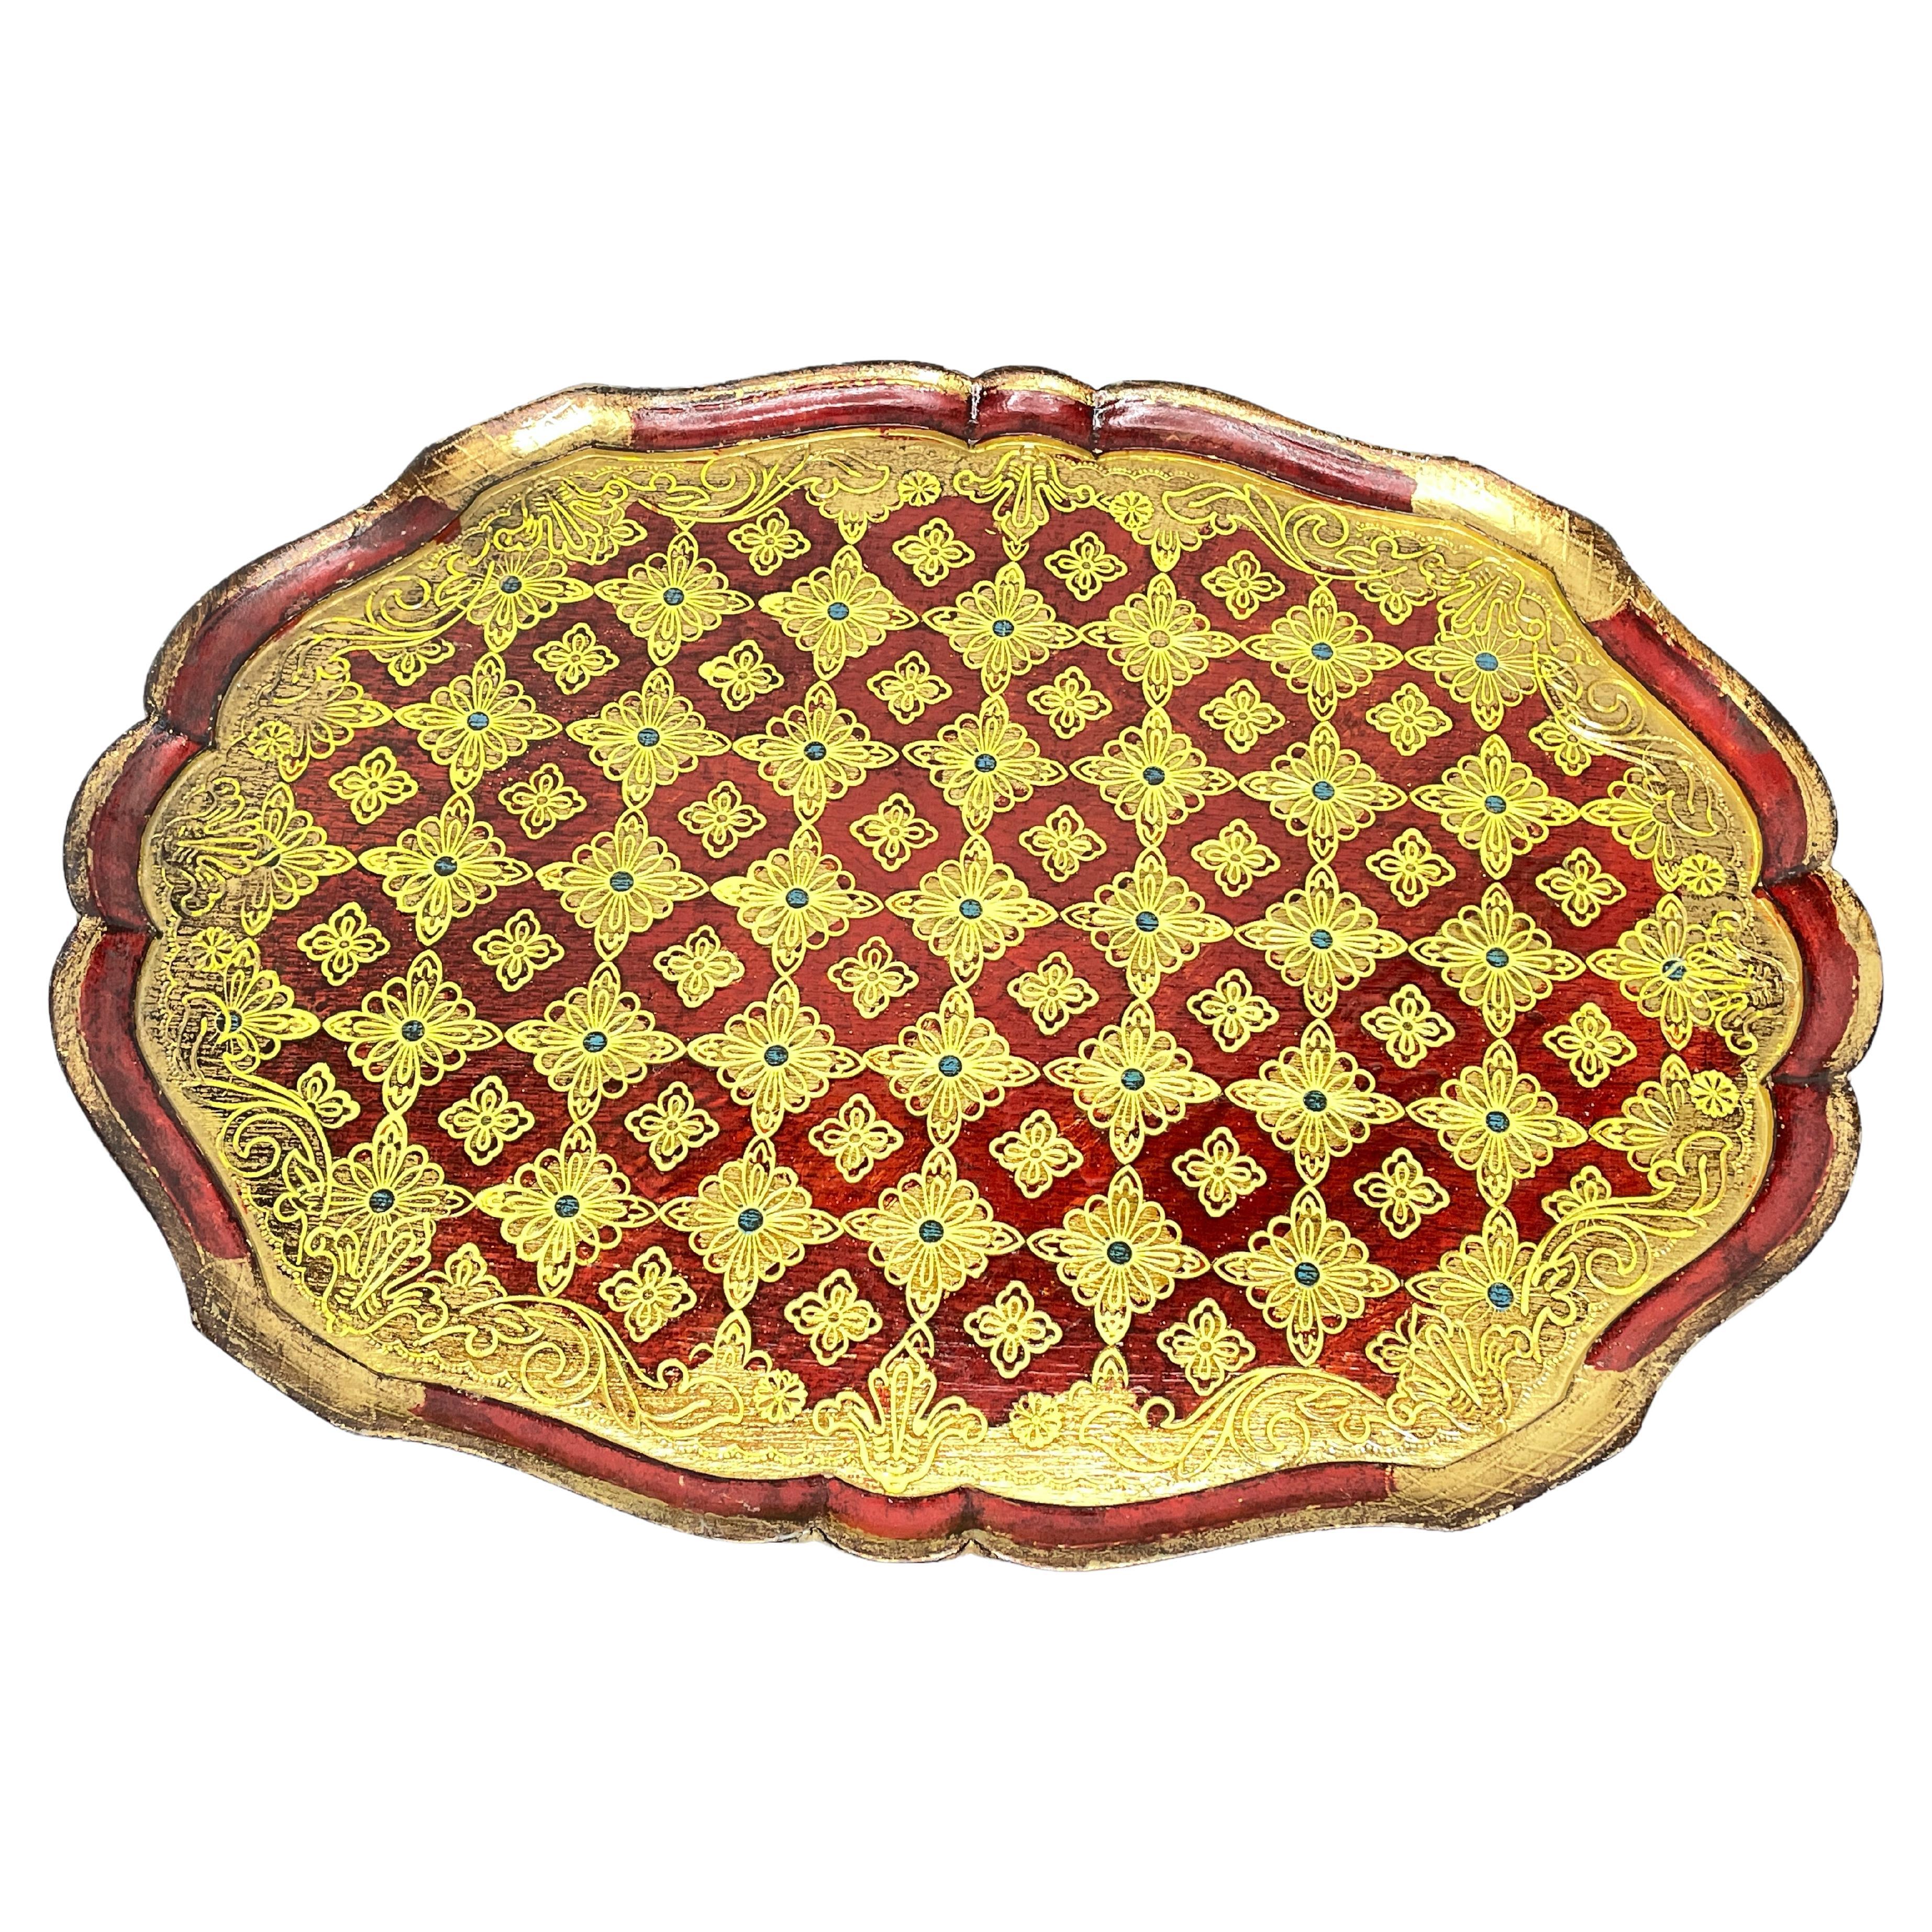 Stunning Italian Florentine Gilded Gilt Wood Serving Tray Toleware Tole, 1960s